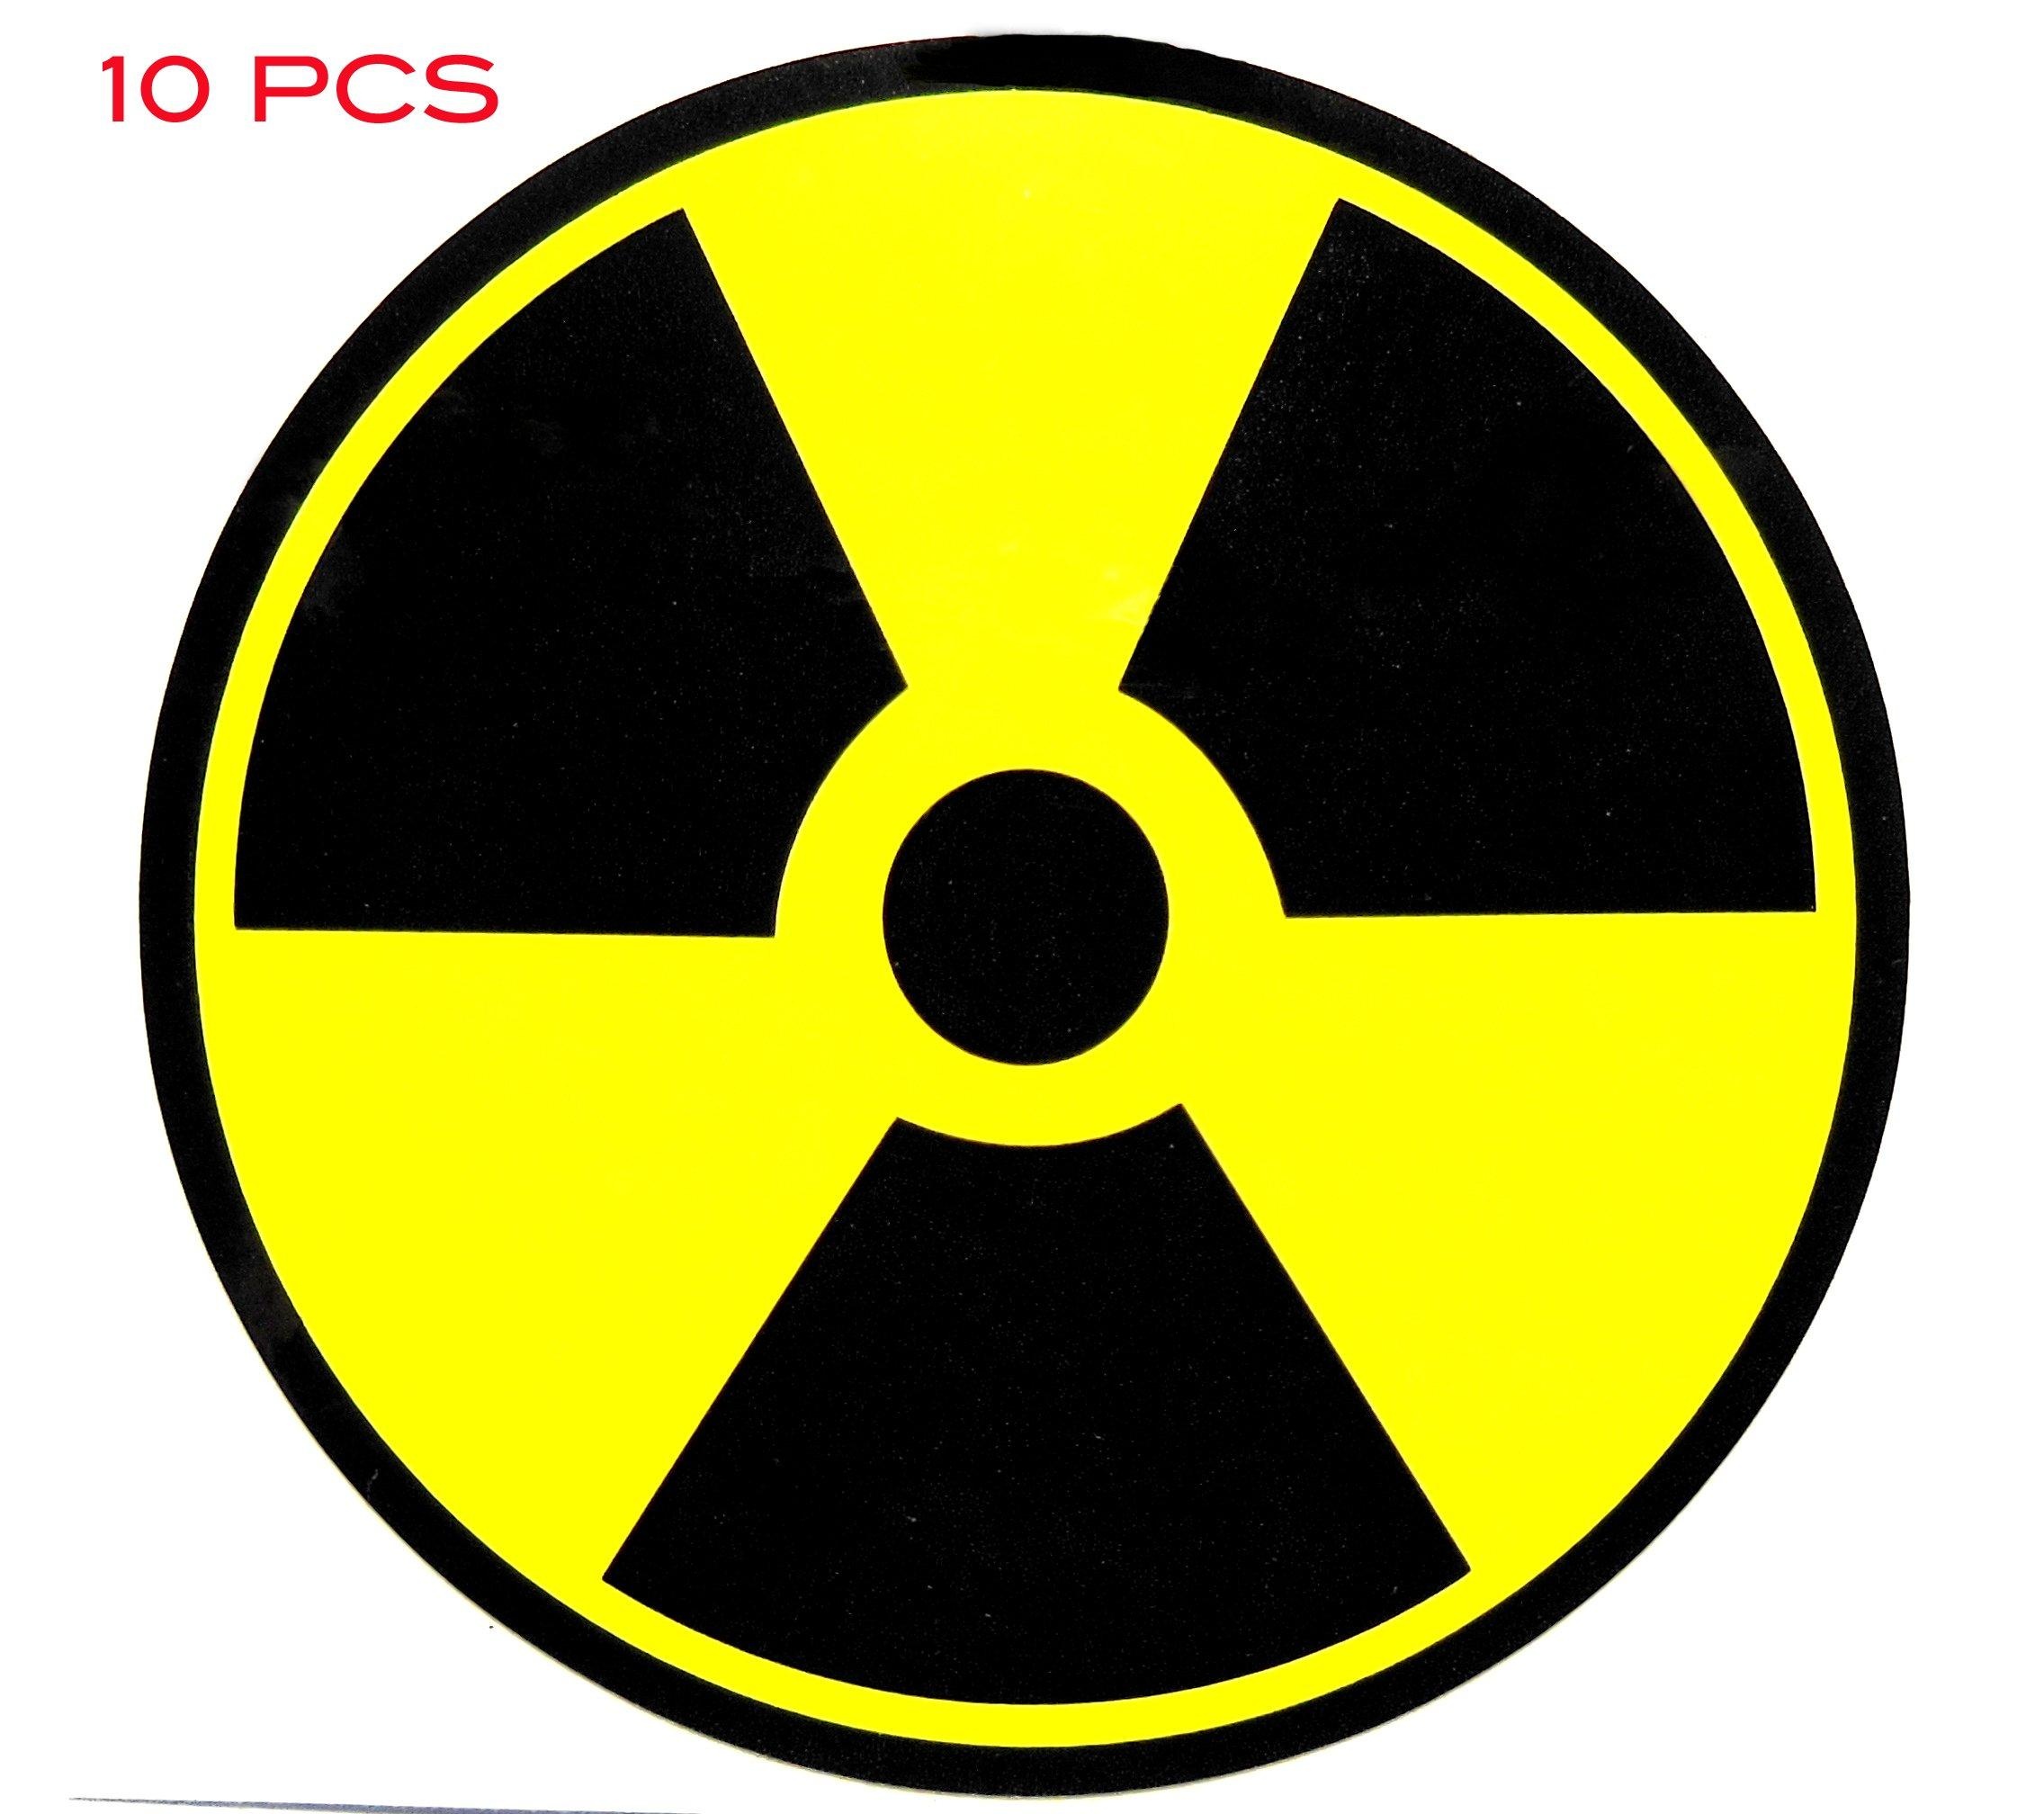 10 pieces of Nuclear Energy Sticker / Emblem / Badge 50mm [760x10 ...